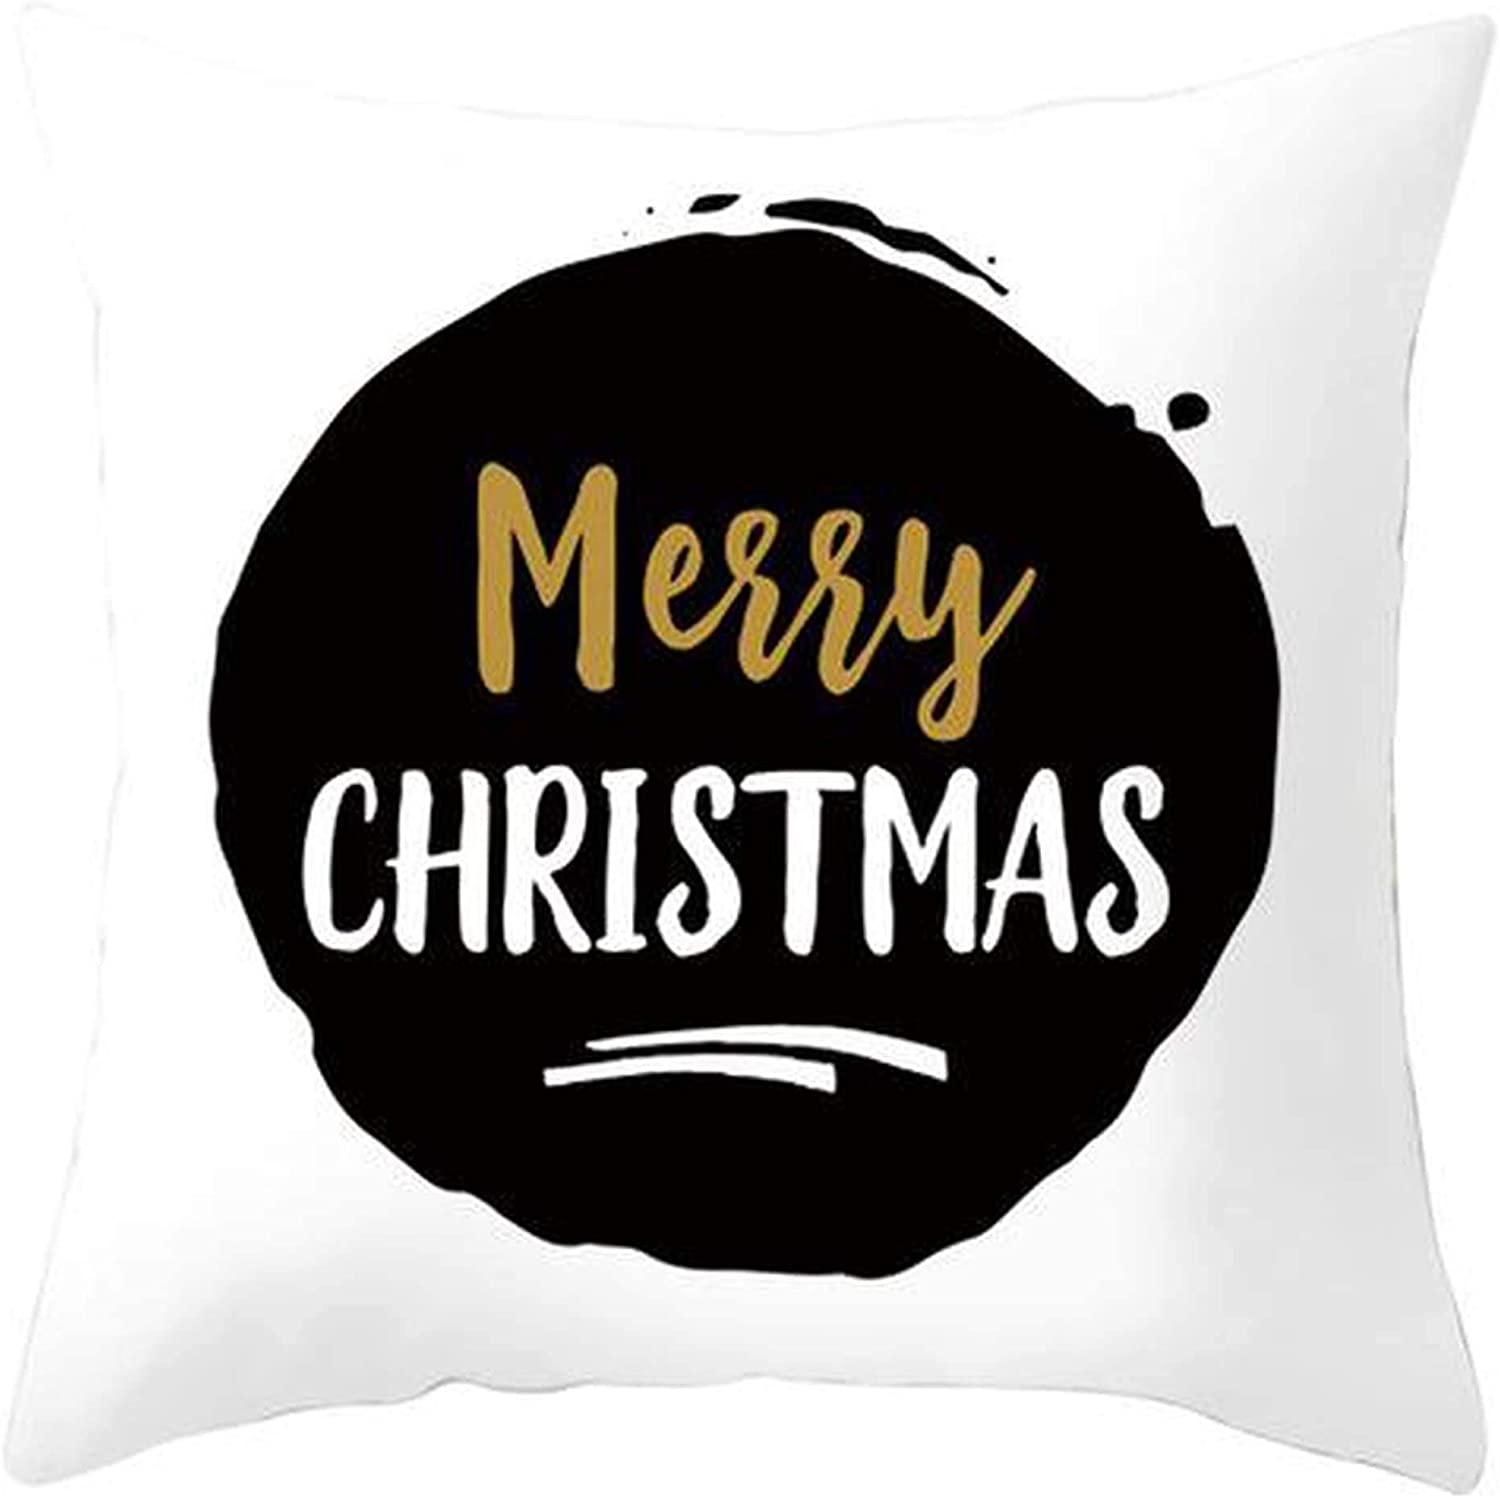 Merry Christmas Square Throw Pillow Cover 21297877 390 Color Graphic Casual Cotton Removable